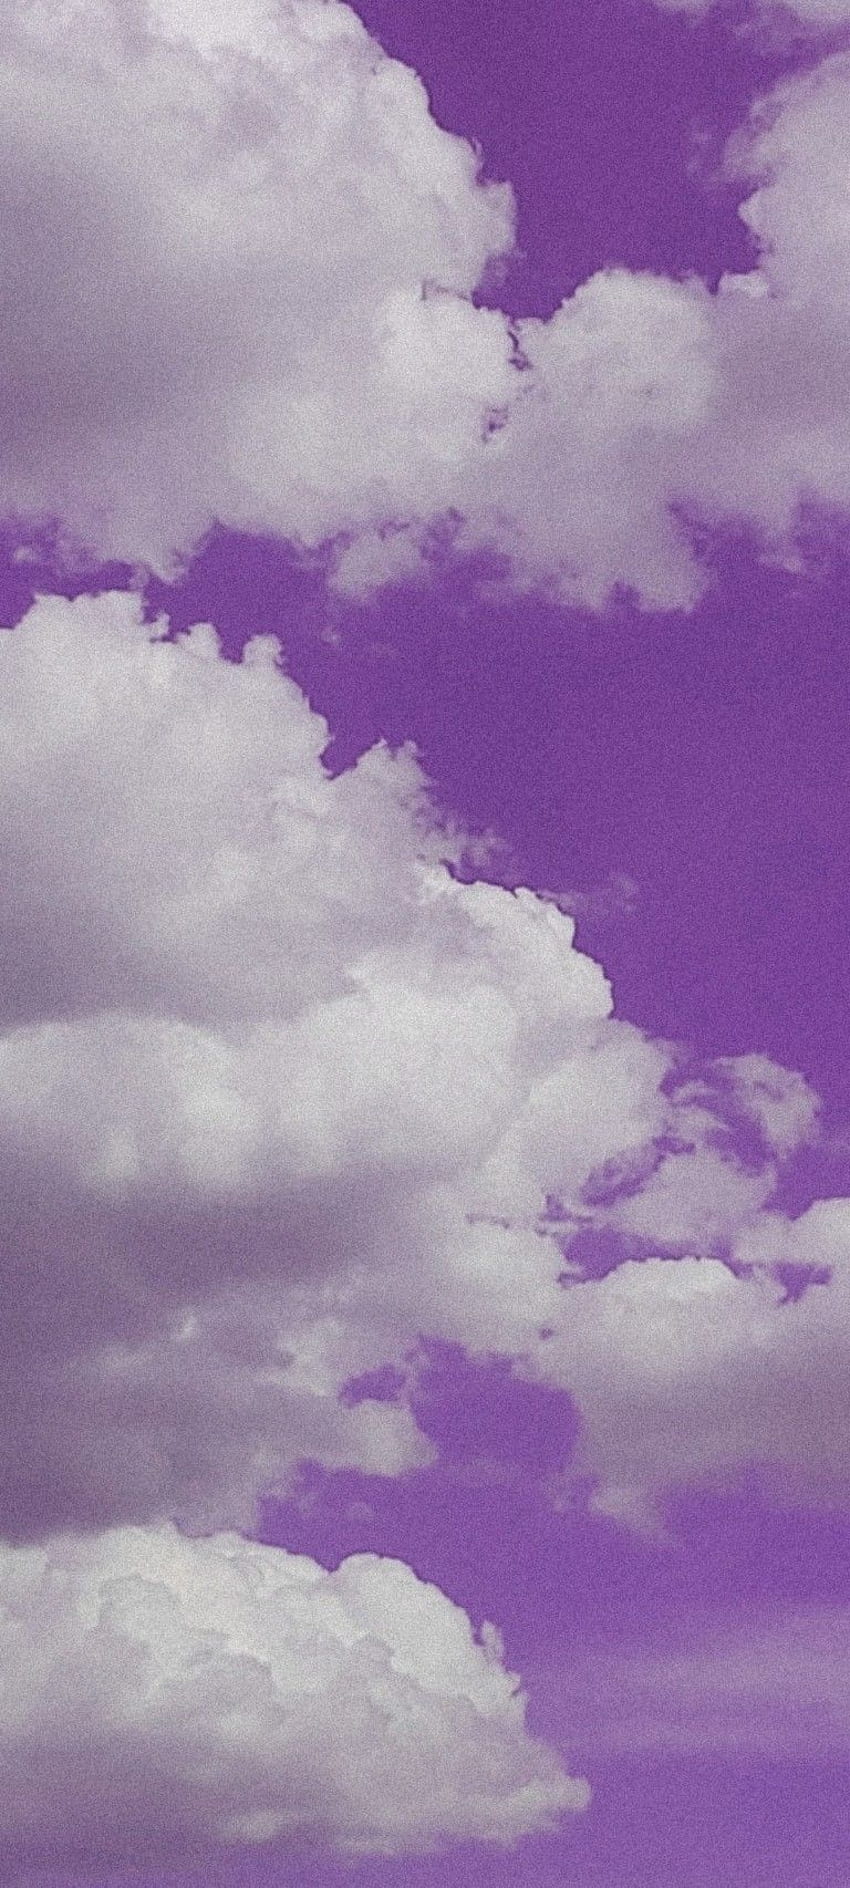 IPhone wallpaper of a purple sky with clouds - Lavender